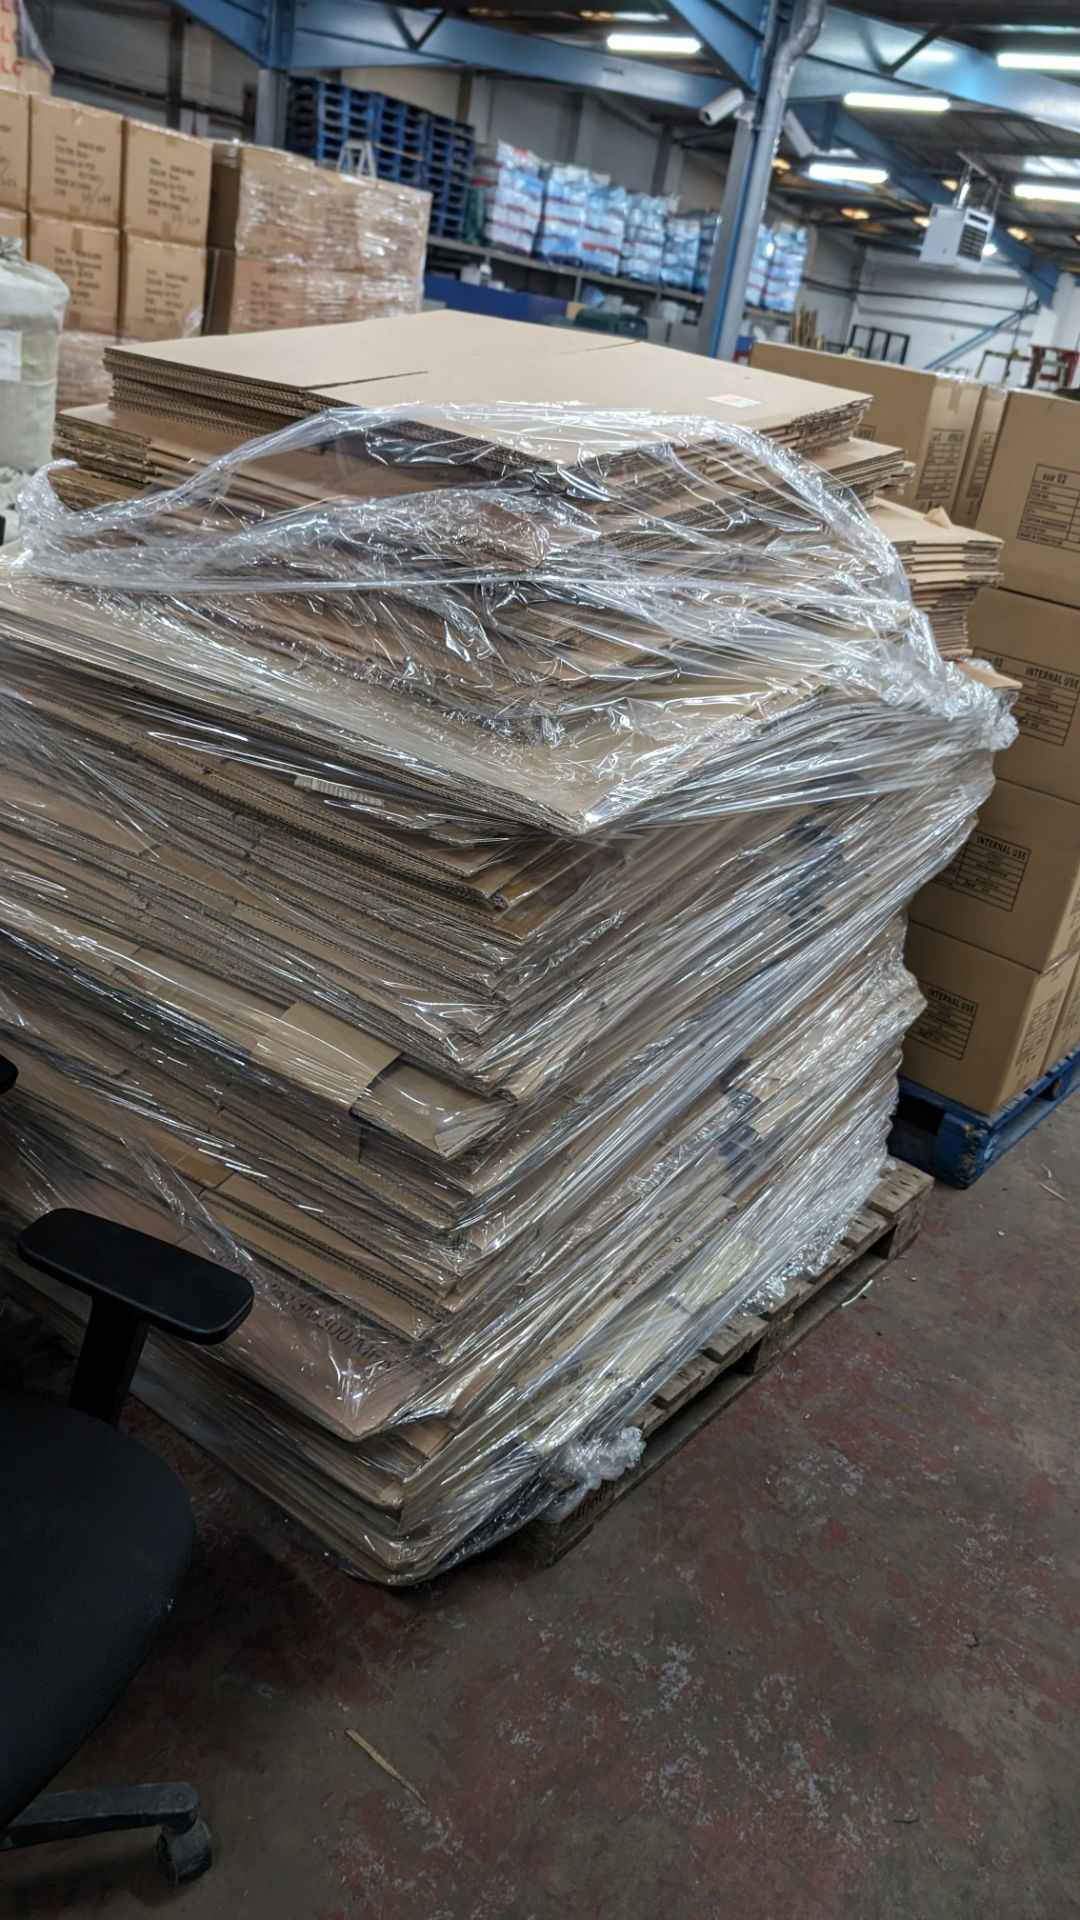 The contents of a pallet of cardboard boxes - 2 stacks